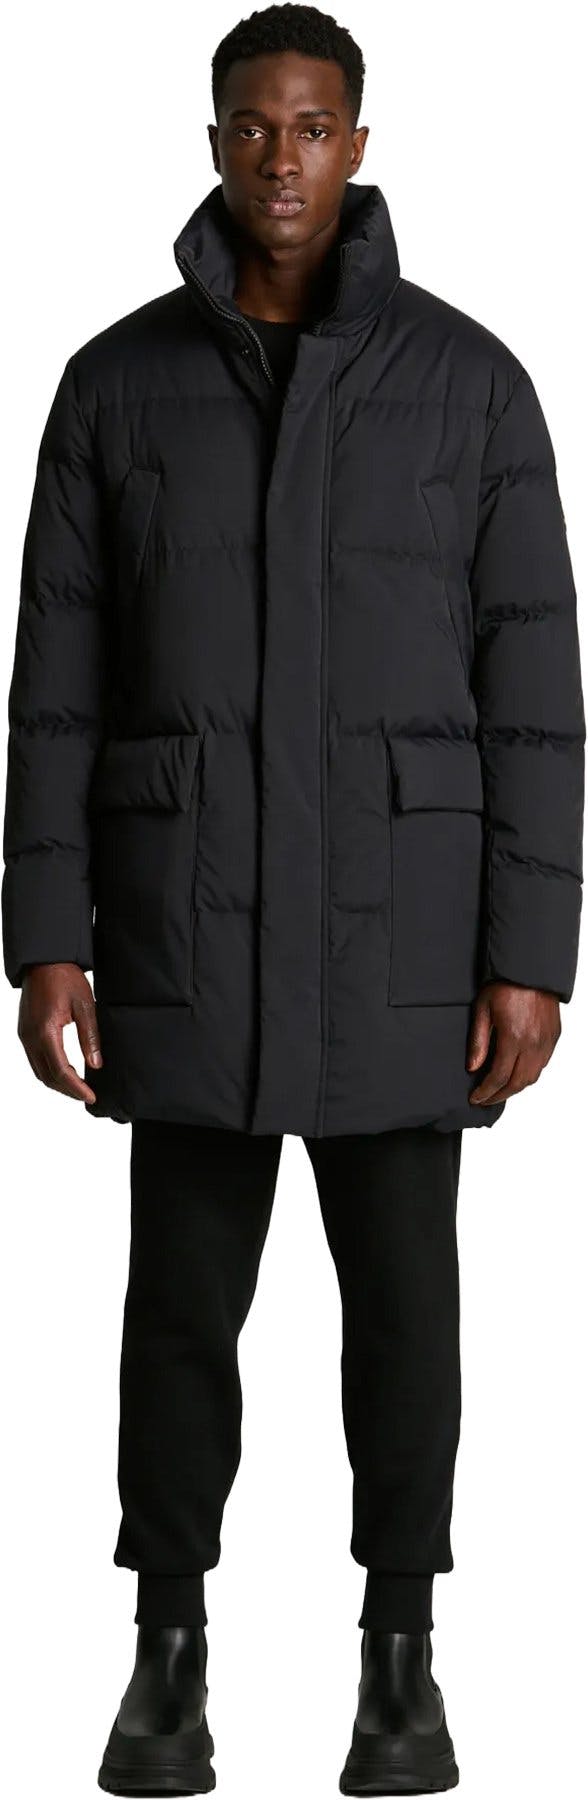 Product image for Harlow Jacket - Men's